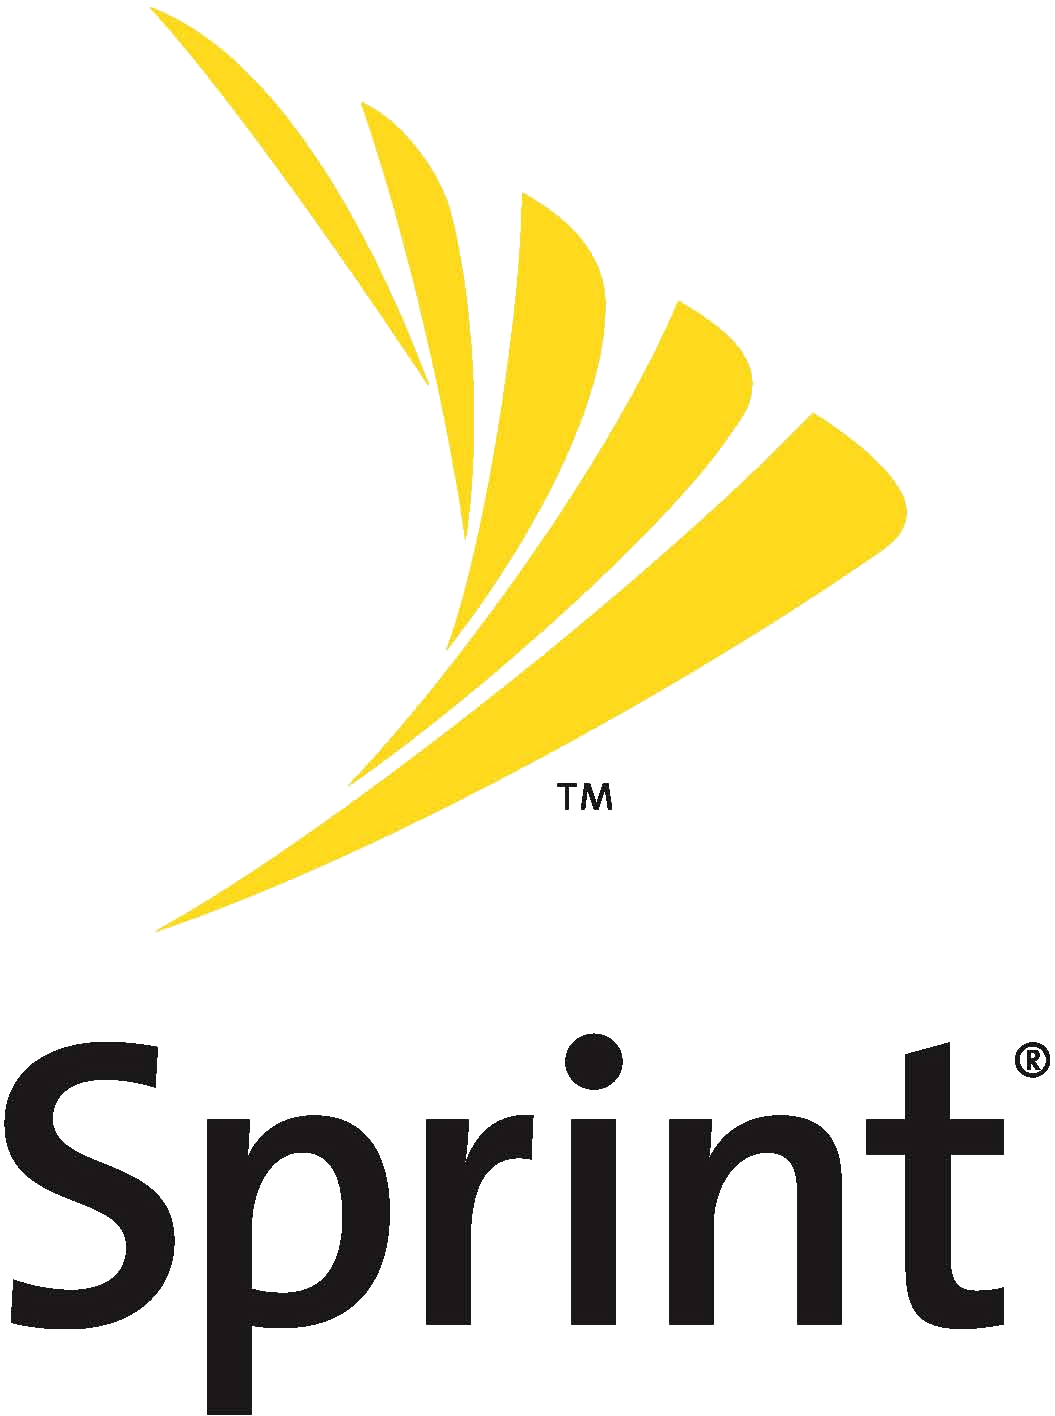 Sprint sues AT&T over 5G E false advertising and deceptive practices